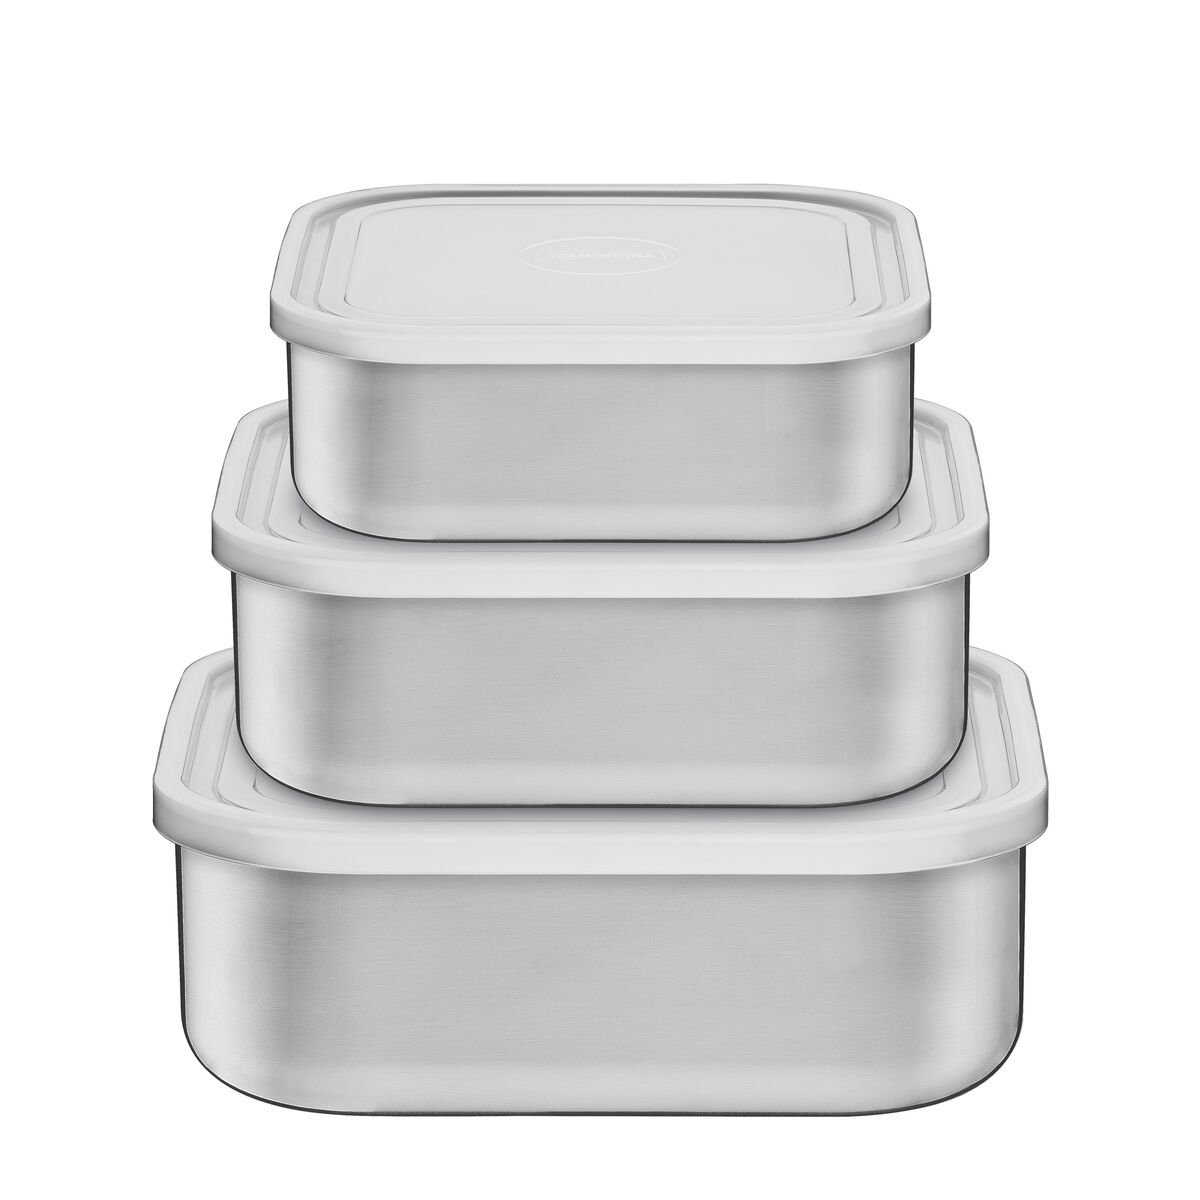 Tramontina Freezinox square stainless steel container set with plastic lid, 3 pieces